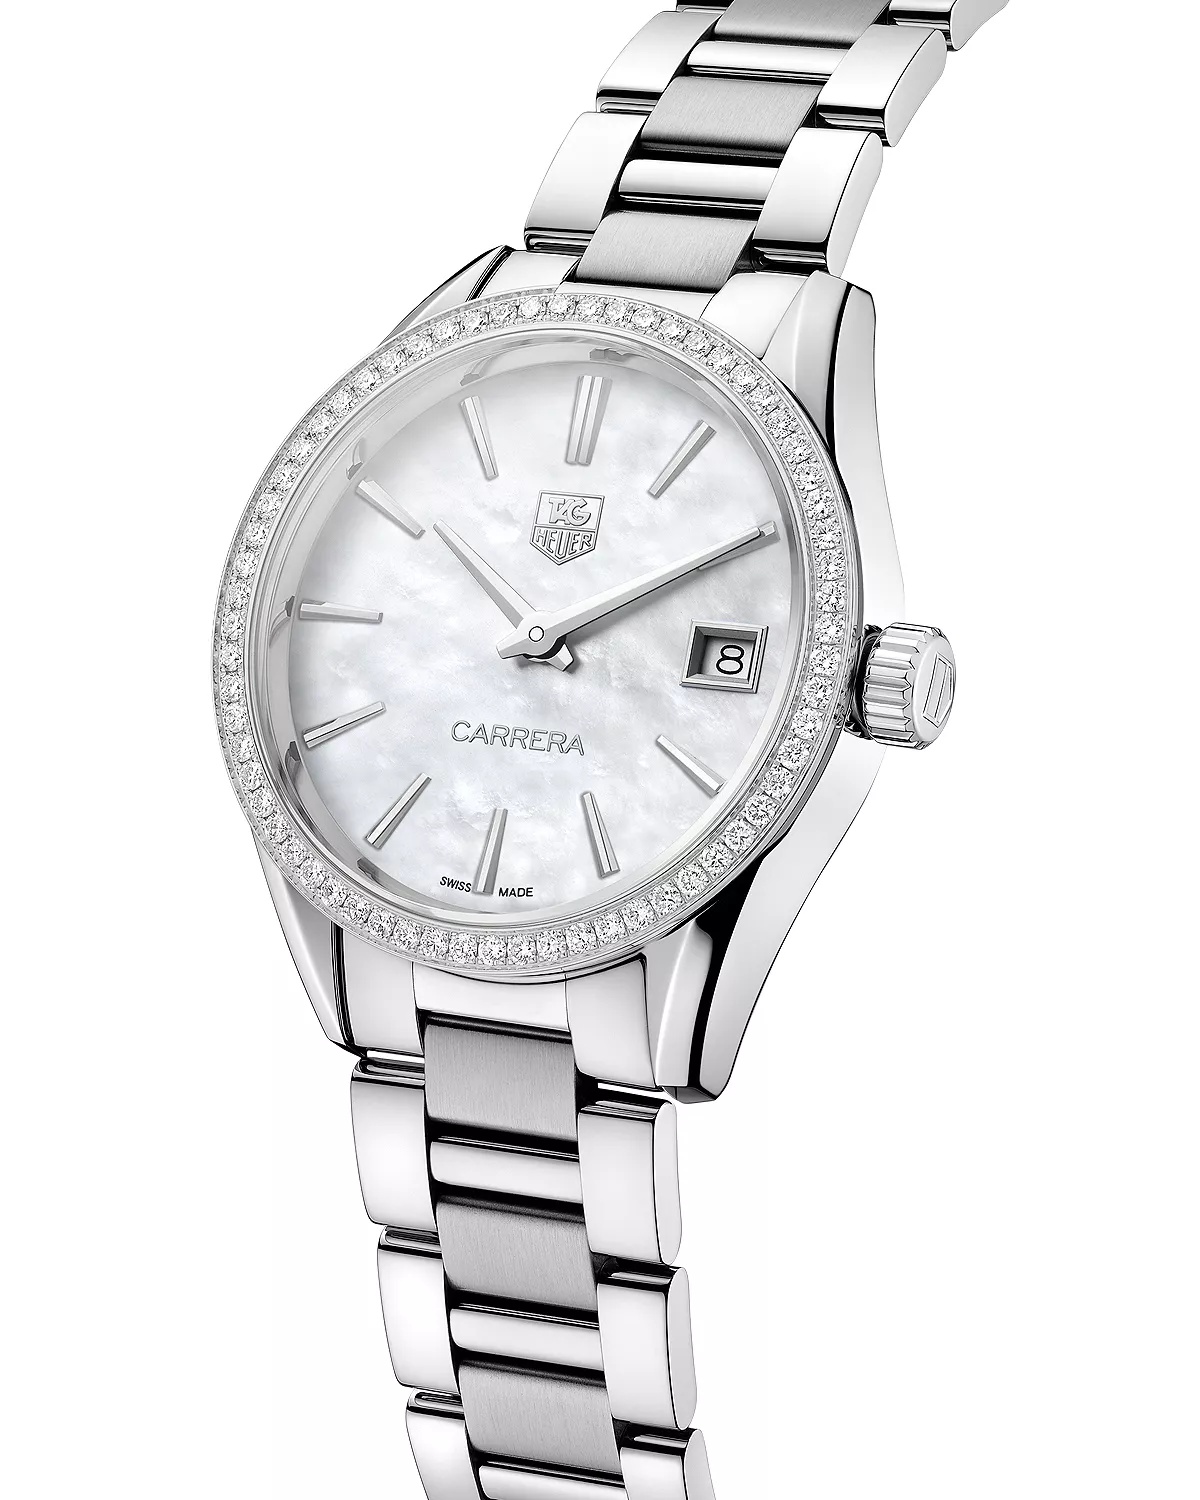 Carrera Stainless Steel and White Mother of Pearl Dial Watch with Diamond Bezel Case, 32mm - 4